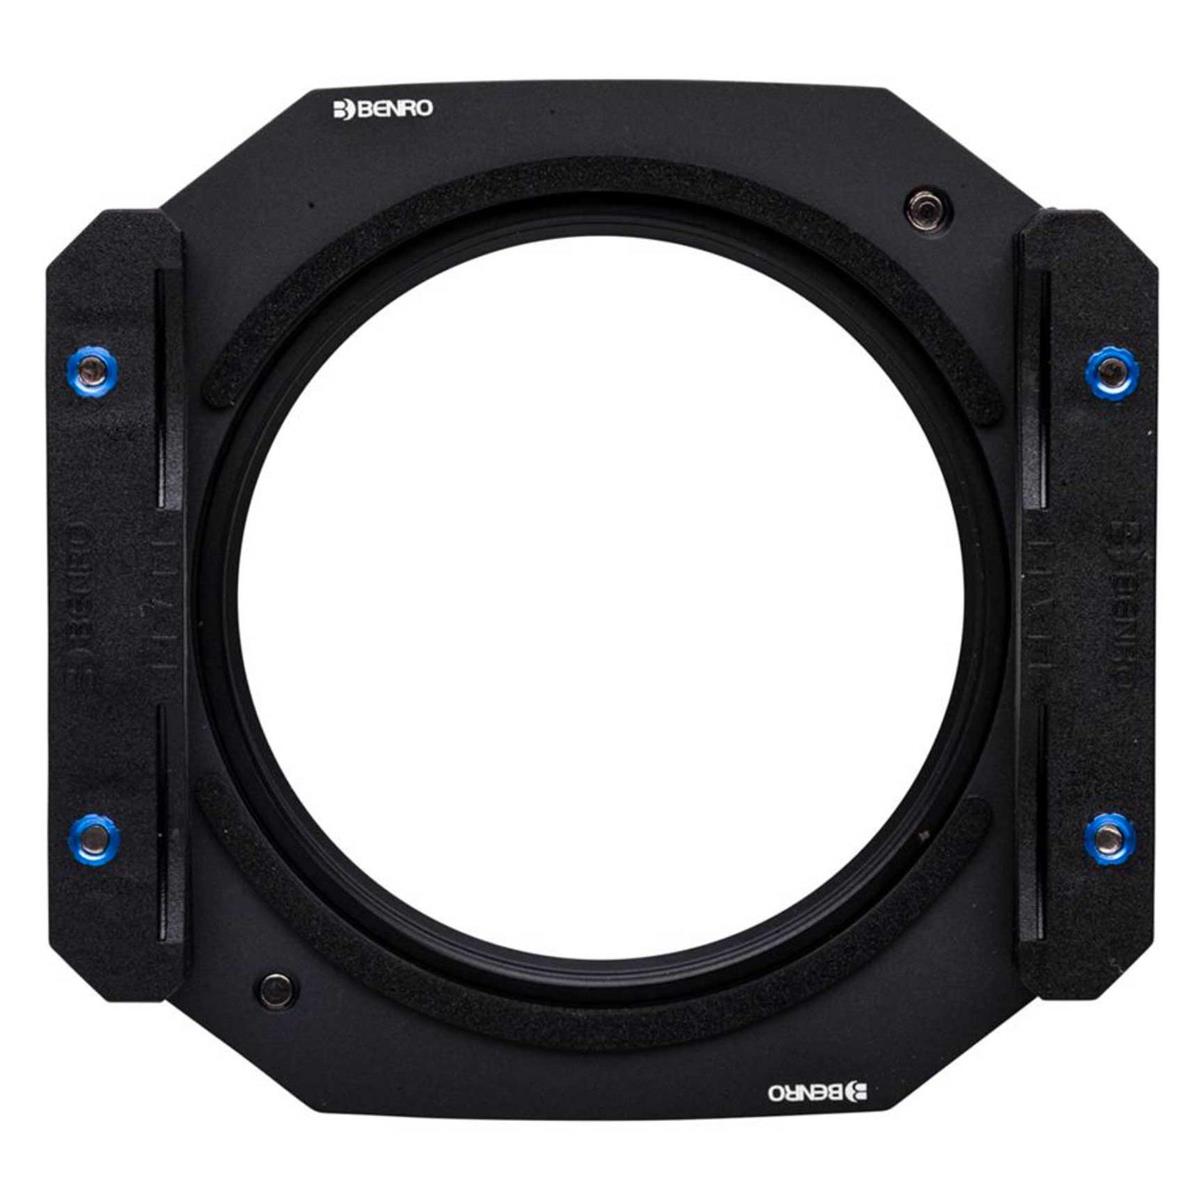 Photos - Other photo accessories Benro Master Series 100mm Filter Holder Set for 82mm Slim CPL Filter FH100 